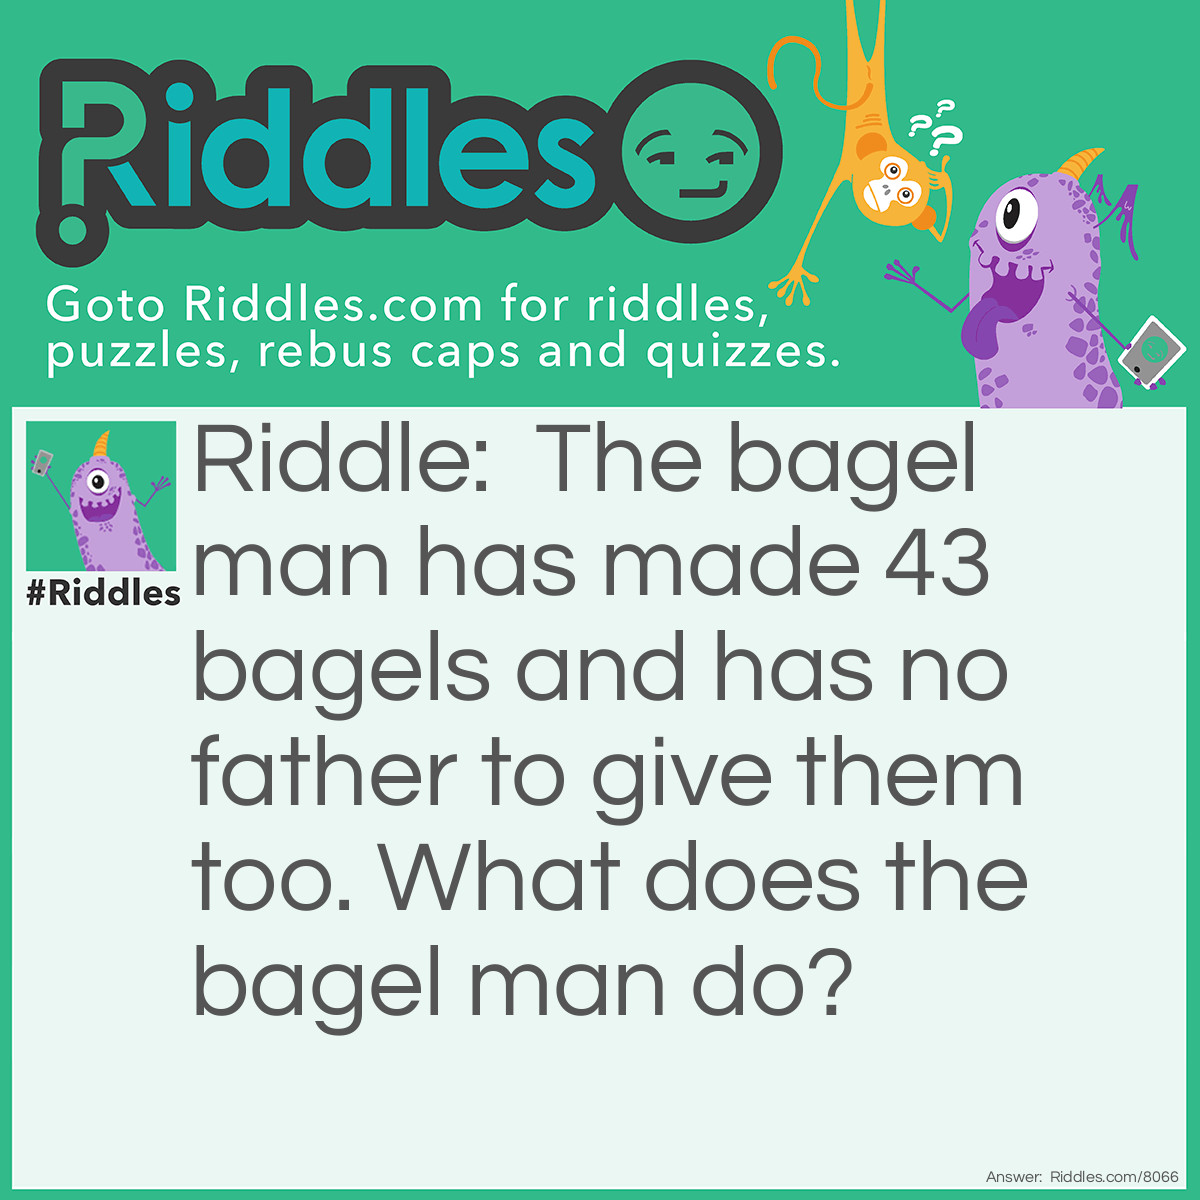 Riddle: The bagel man has made 43 bagels and has no father to give them too. What does the bagel man do? Answer: He gives them to his moms.